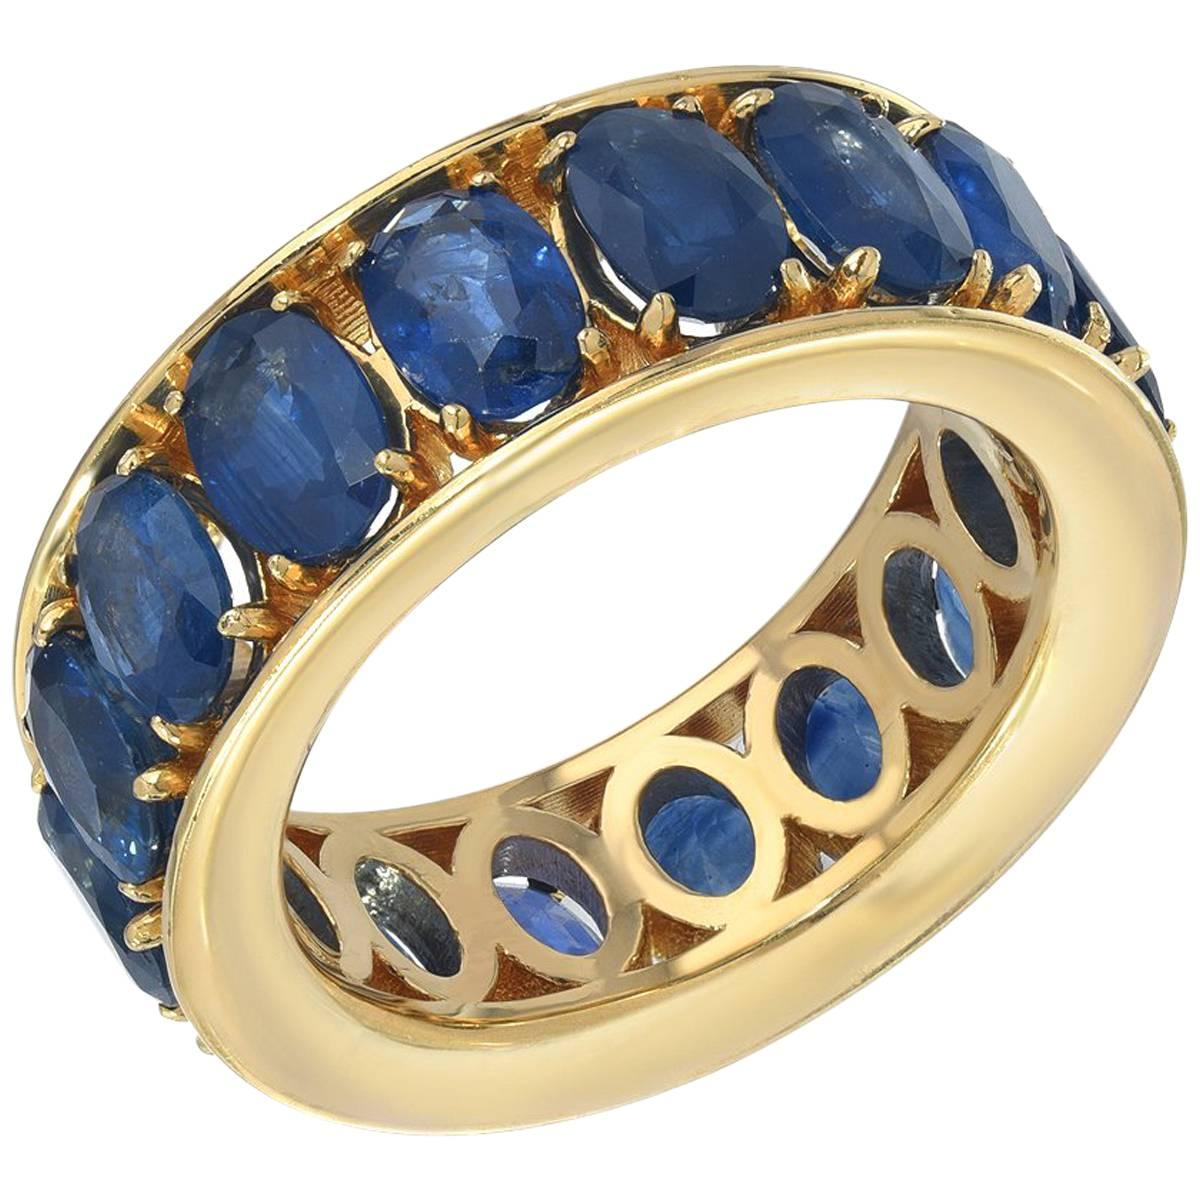 Boorma 18 Karat Blue Oval Sapphire Gold 8.4 Carat Eternity Band For Sale